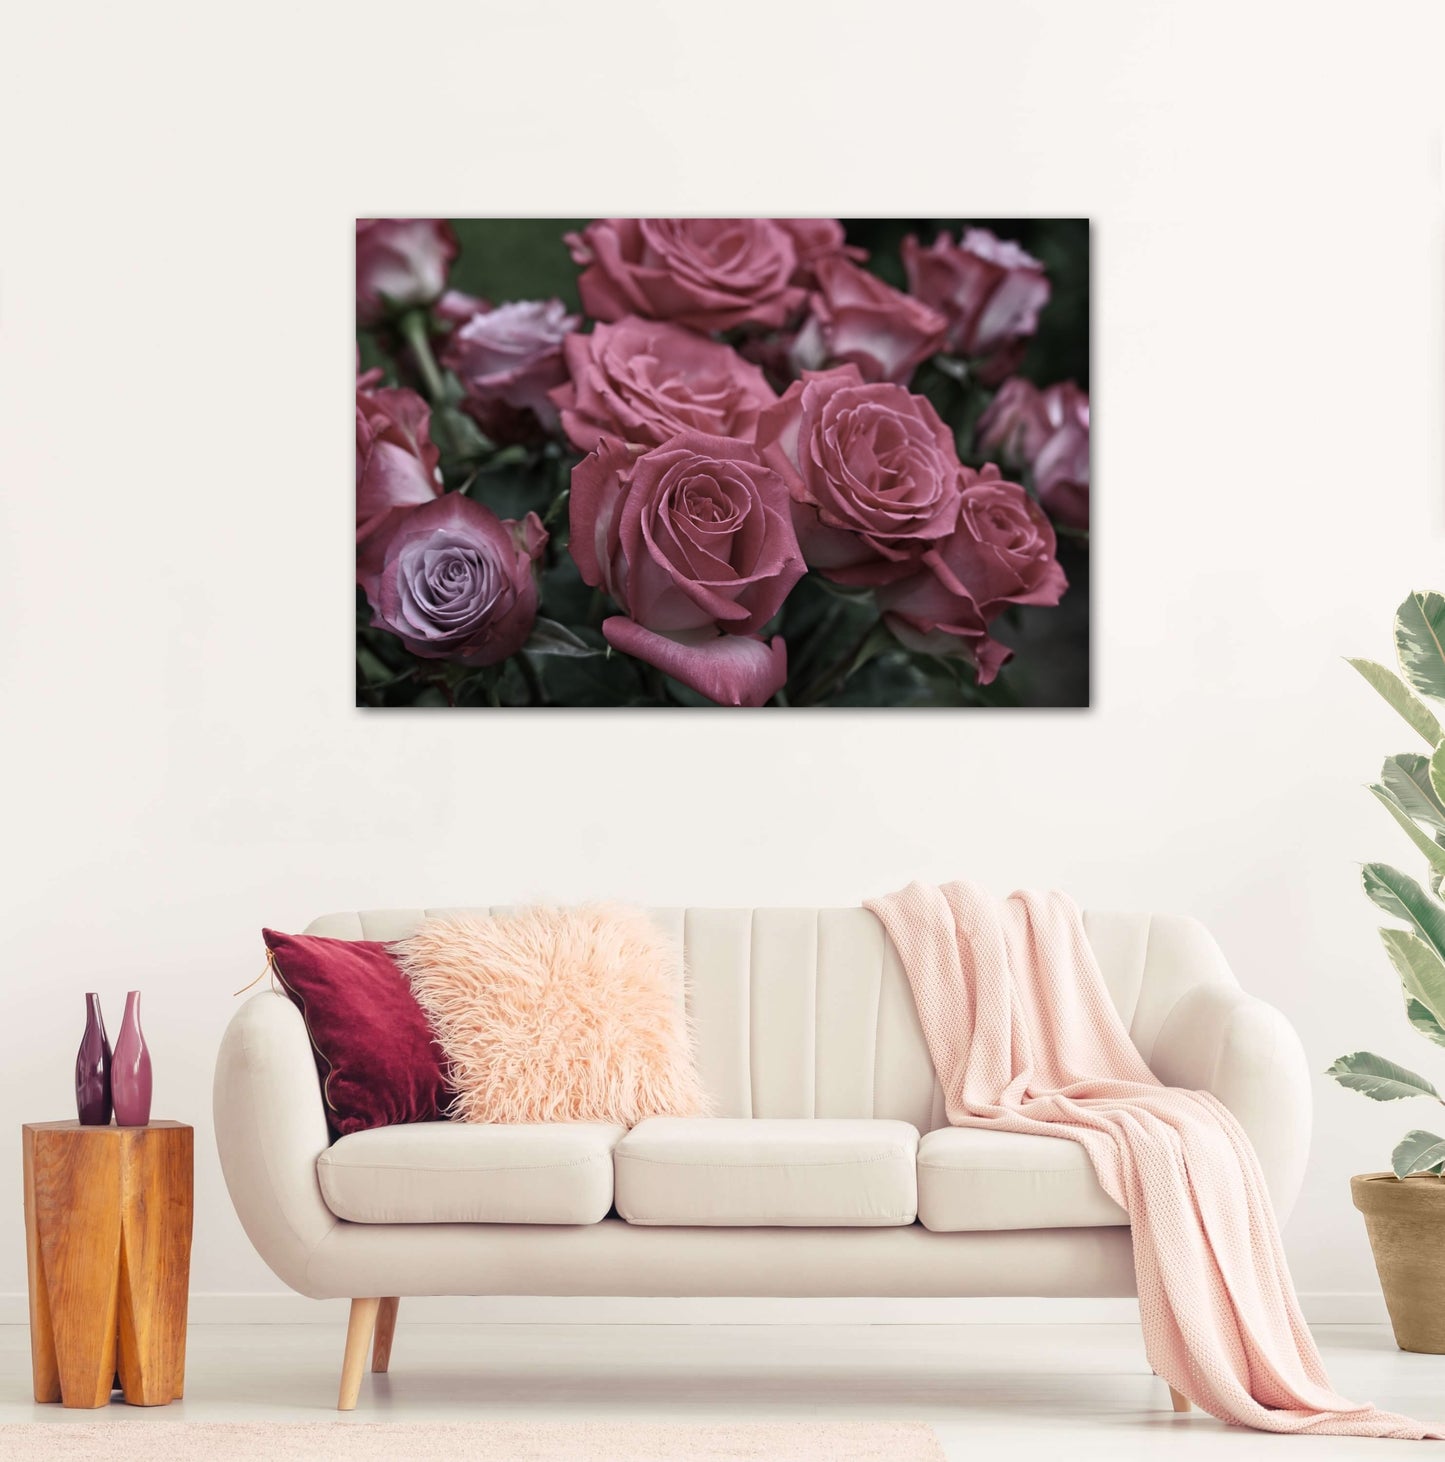 Pink roses photography canvas print on living room wall